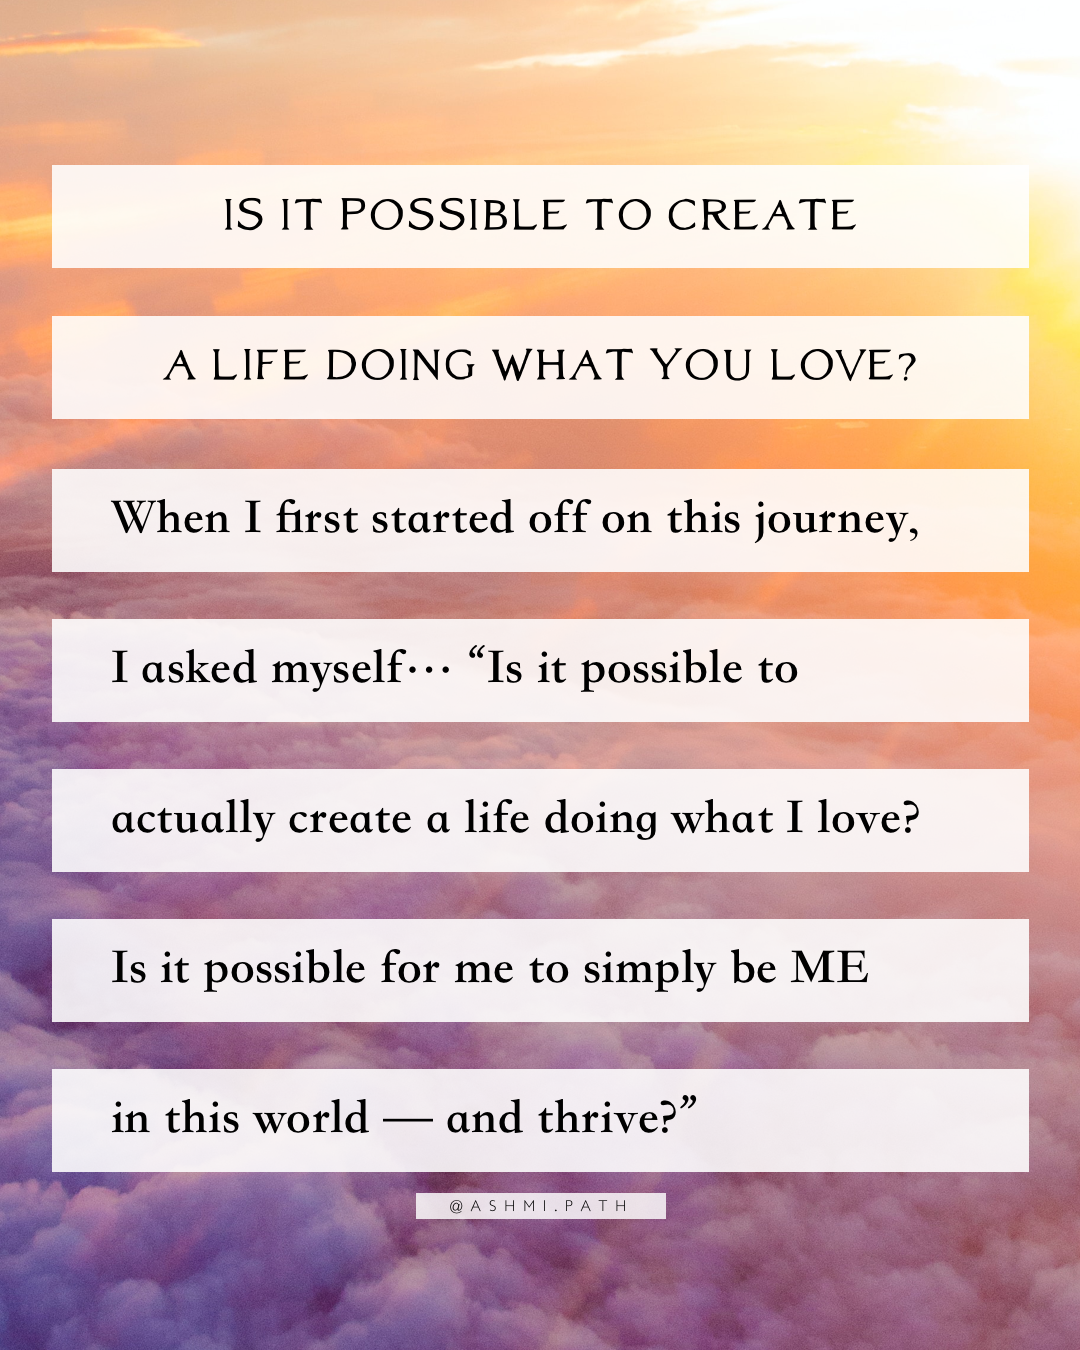 Create a Life Doing What You Love Course ~ Discount for Paid Members